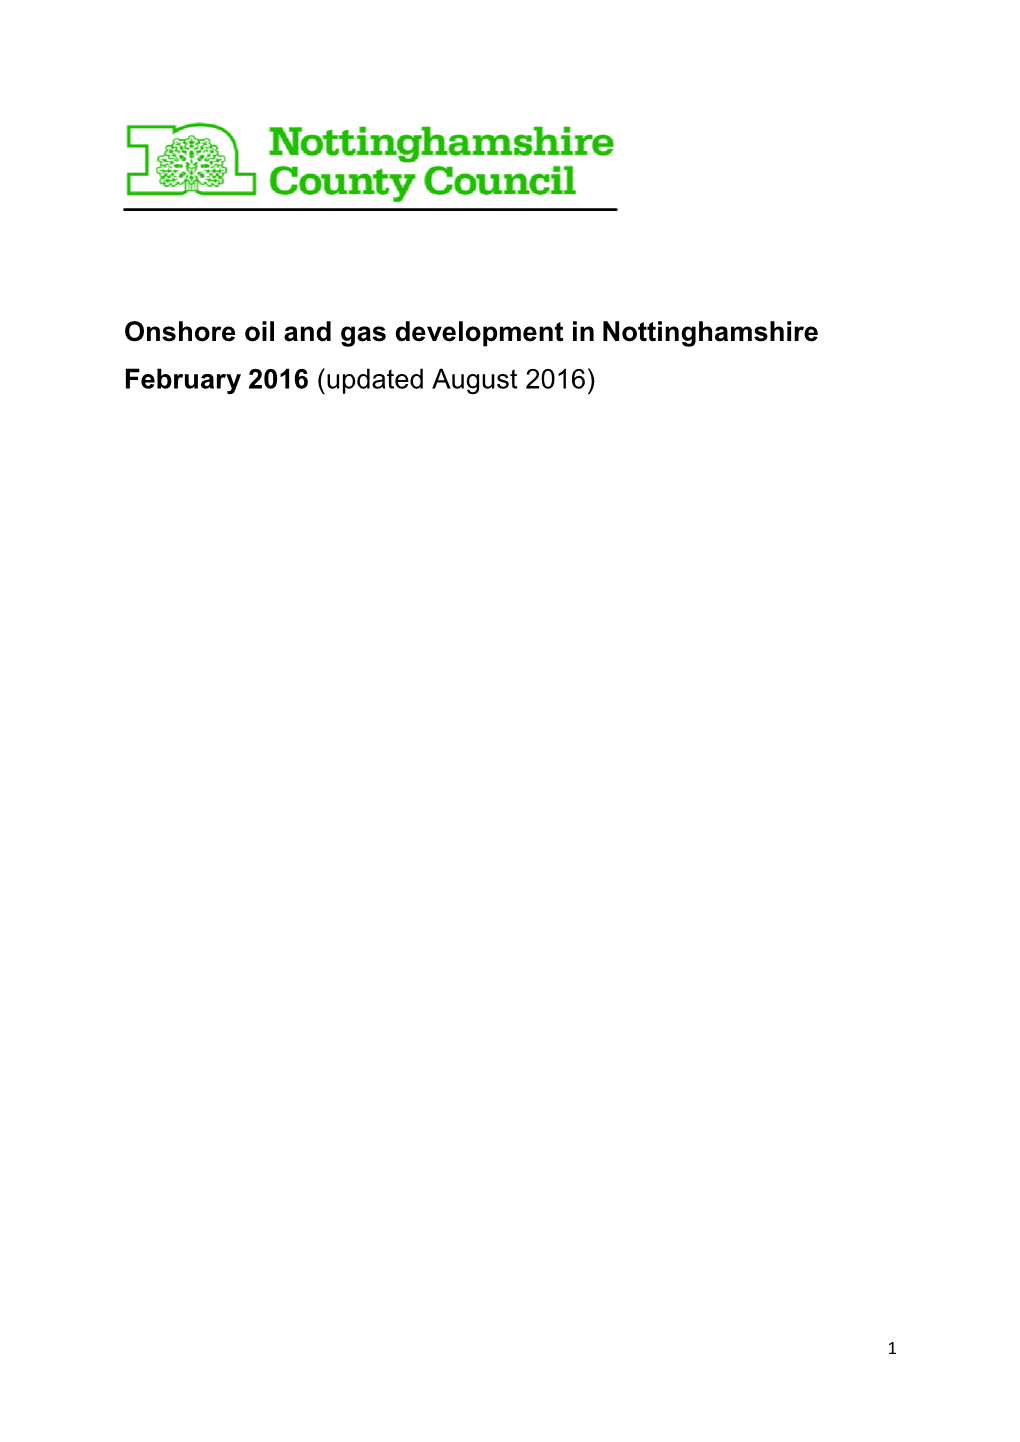 Onshore Oil and Gas Development in Nottinghamshire February 2016 (Updated August 2016)